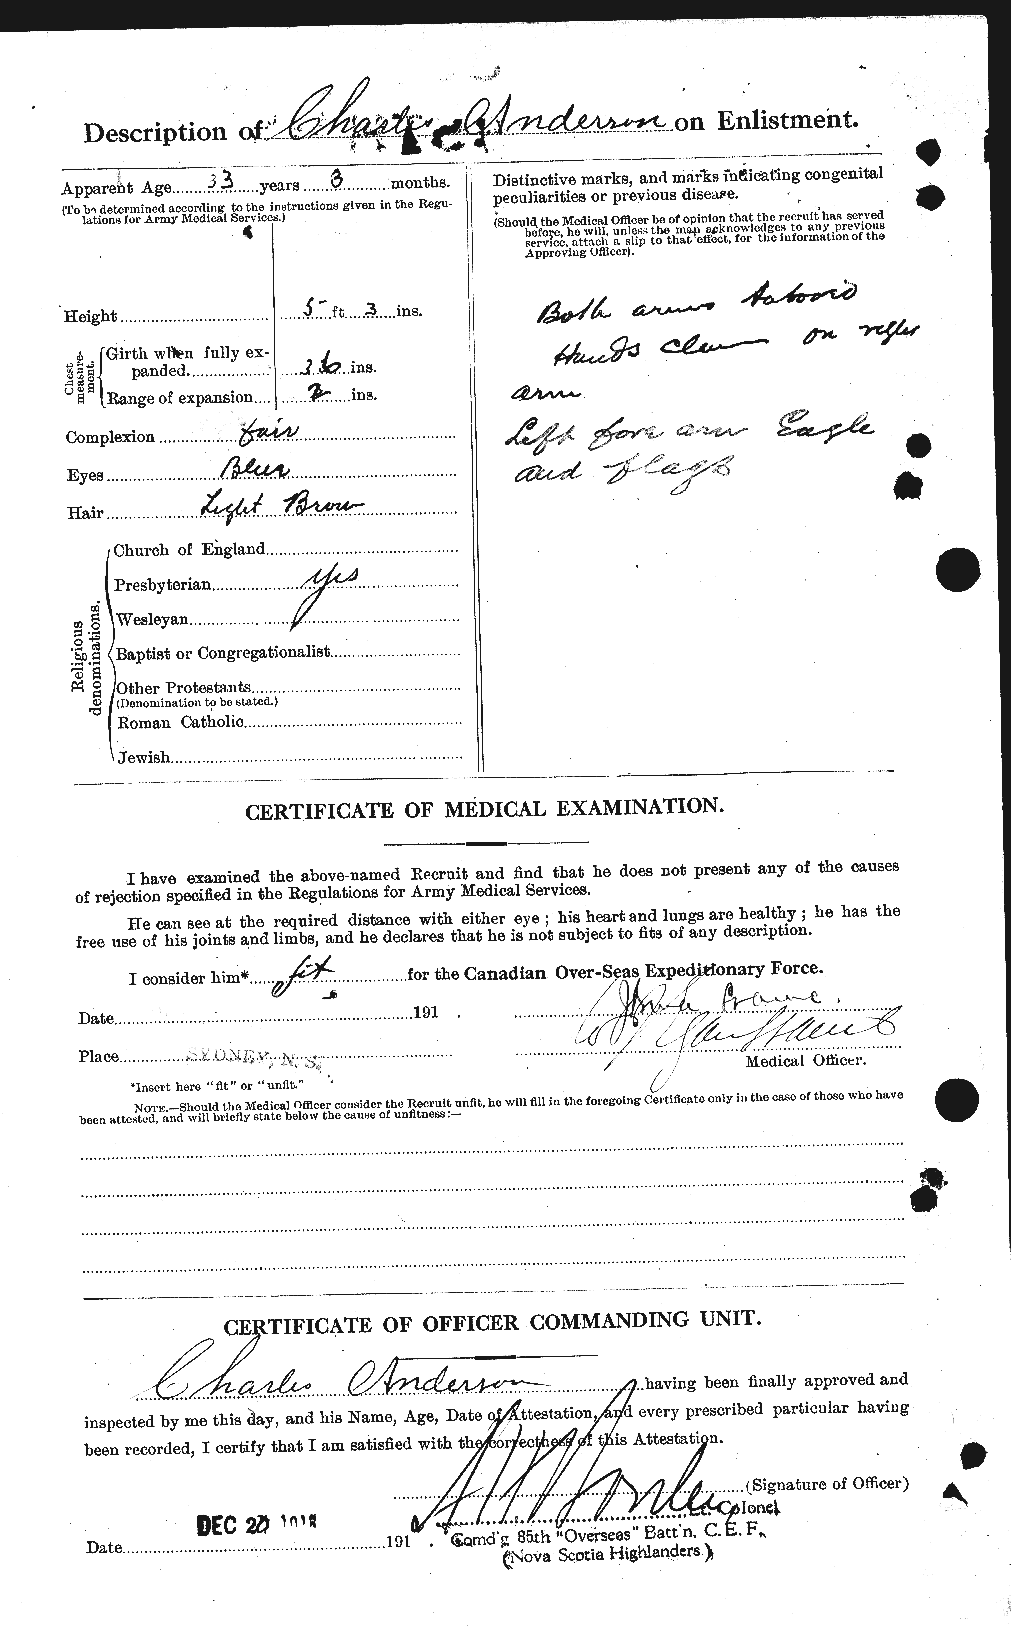 Personnel Records of the First World War - CEF 209254b